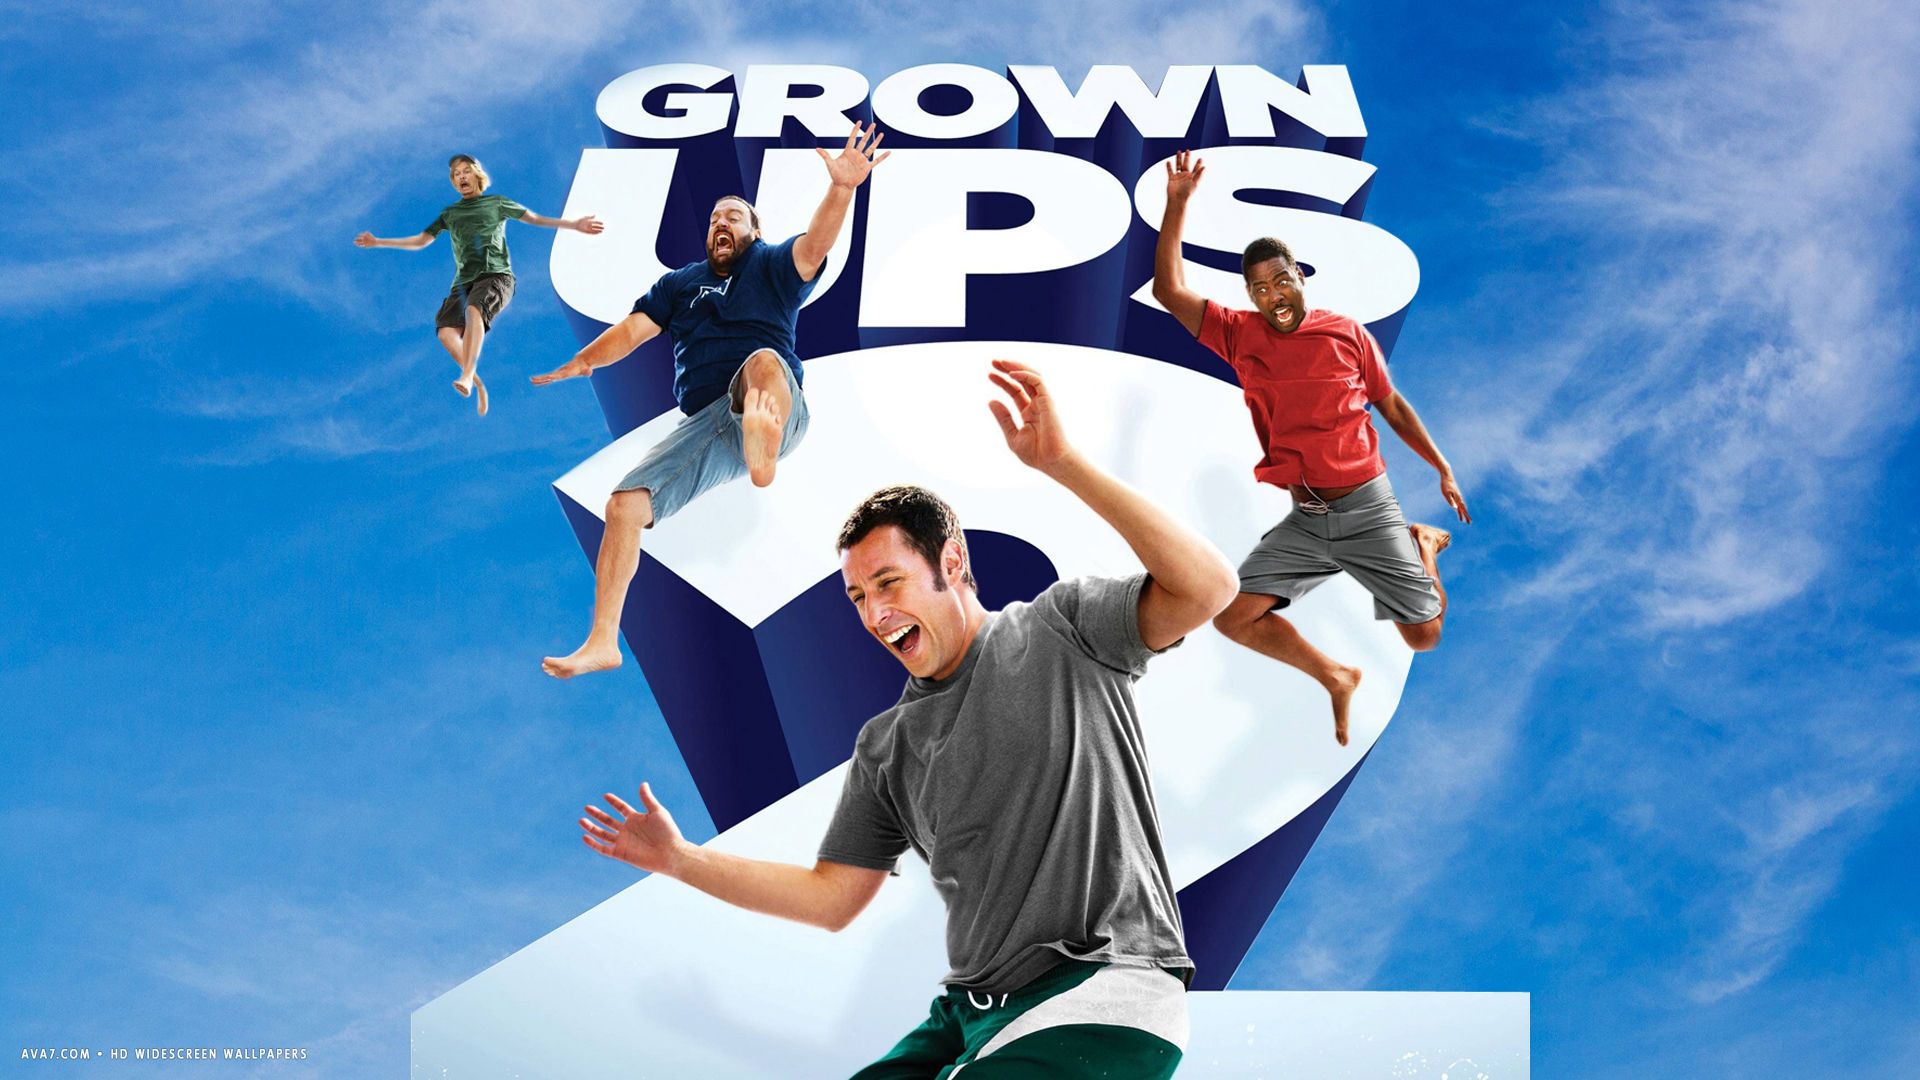 grown ups 2 movie HD widescreen wallpaper / movies background